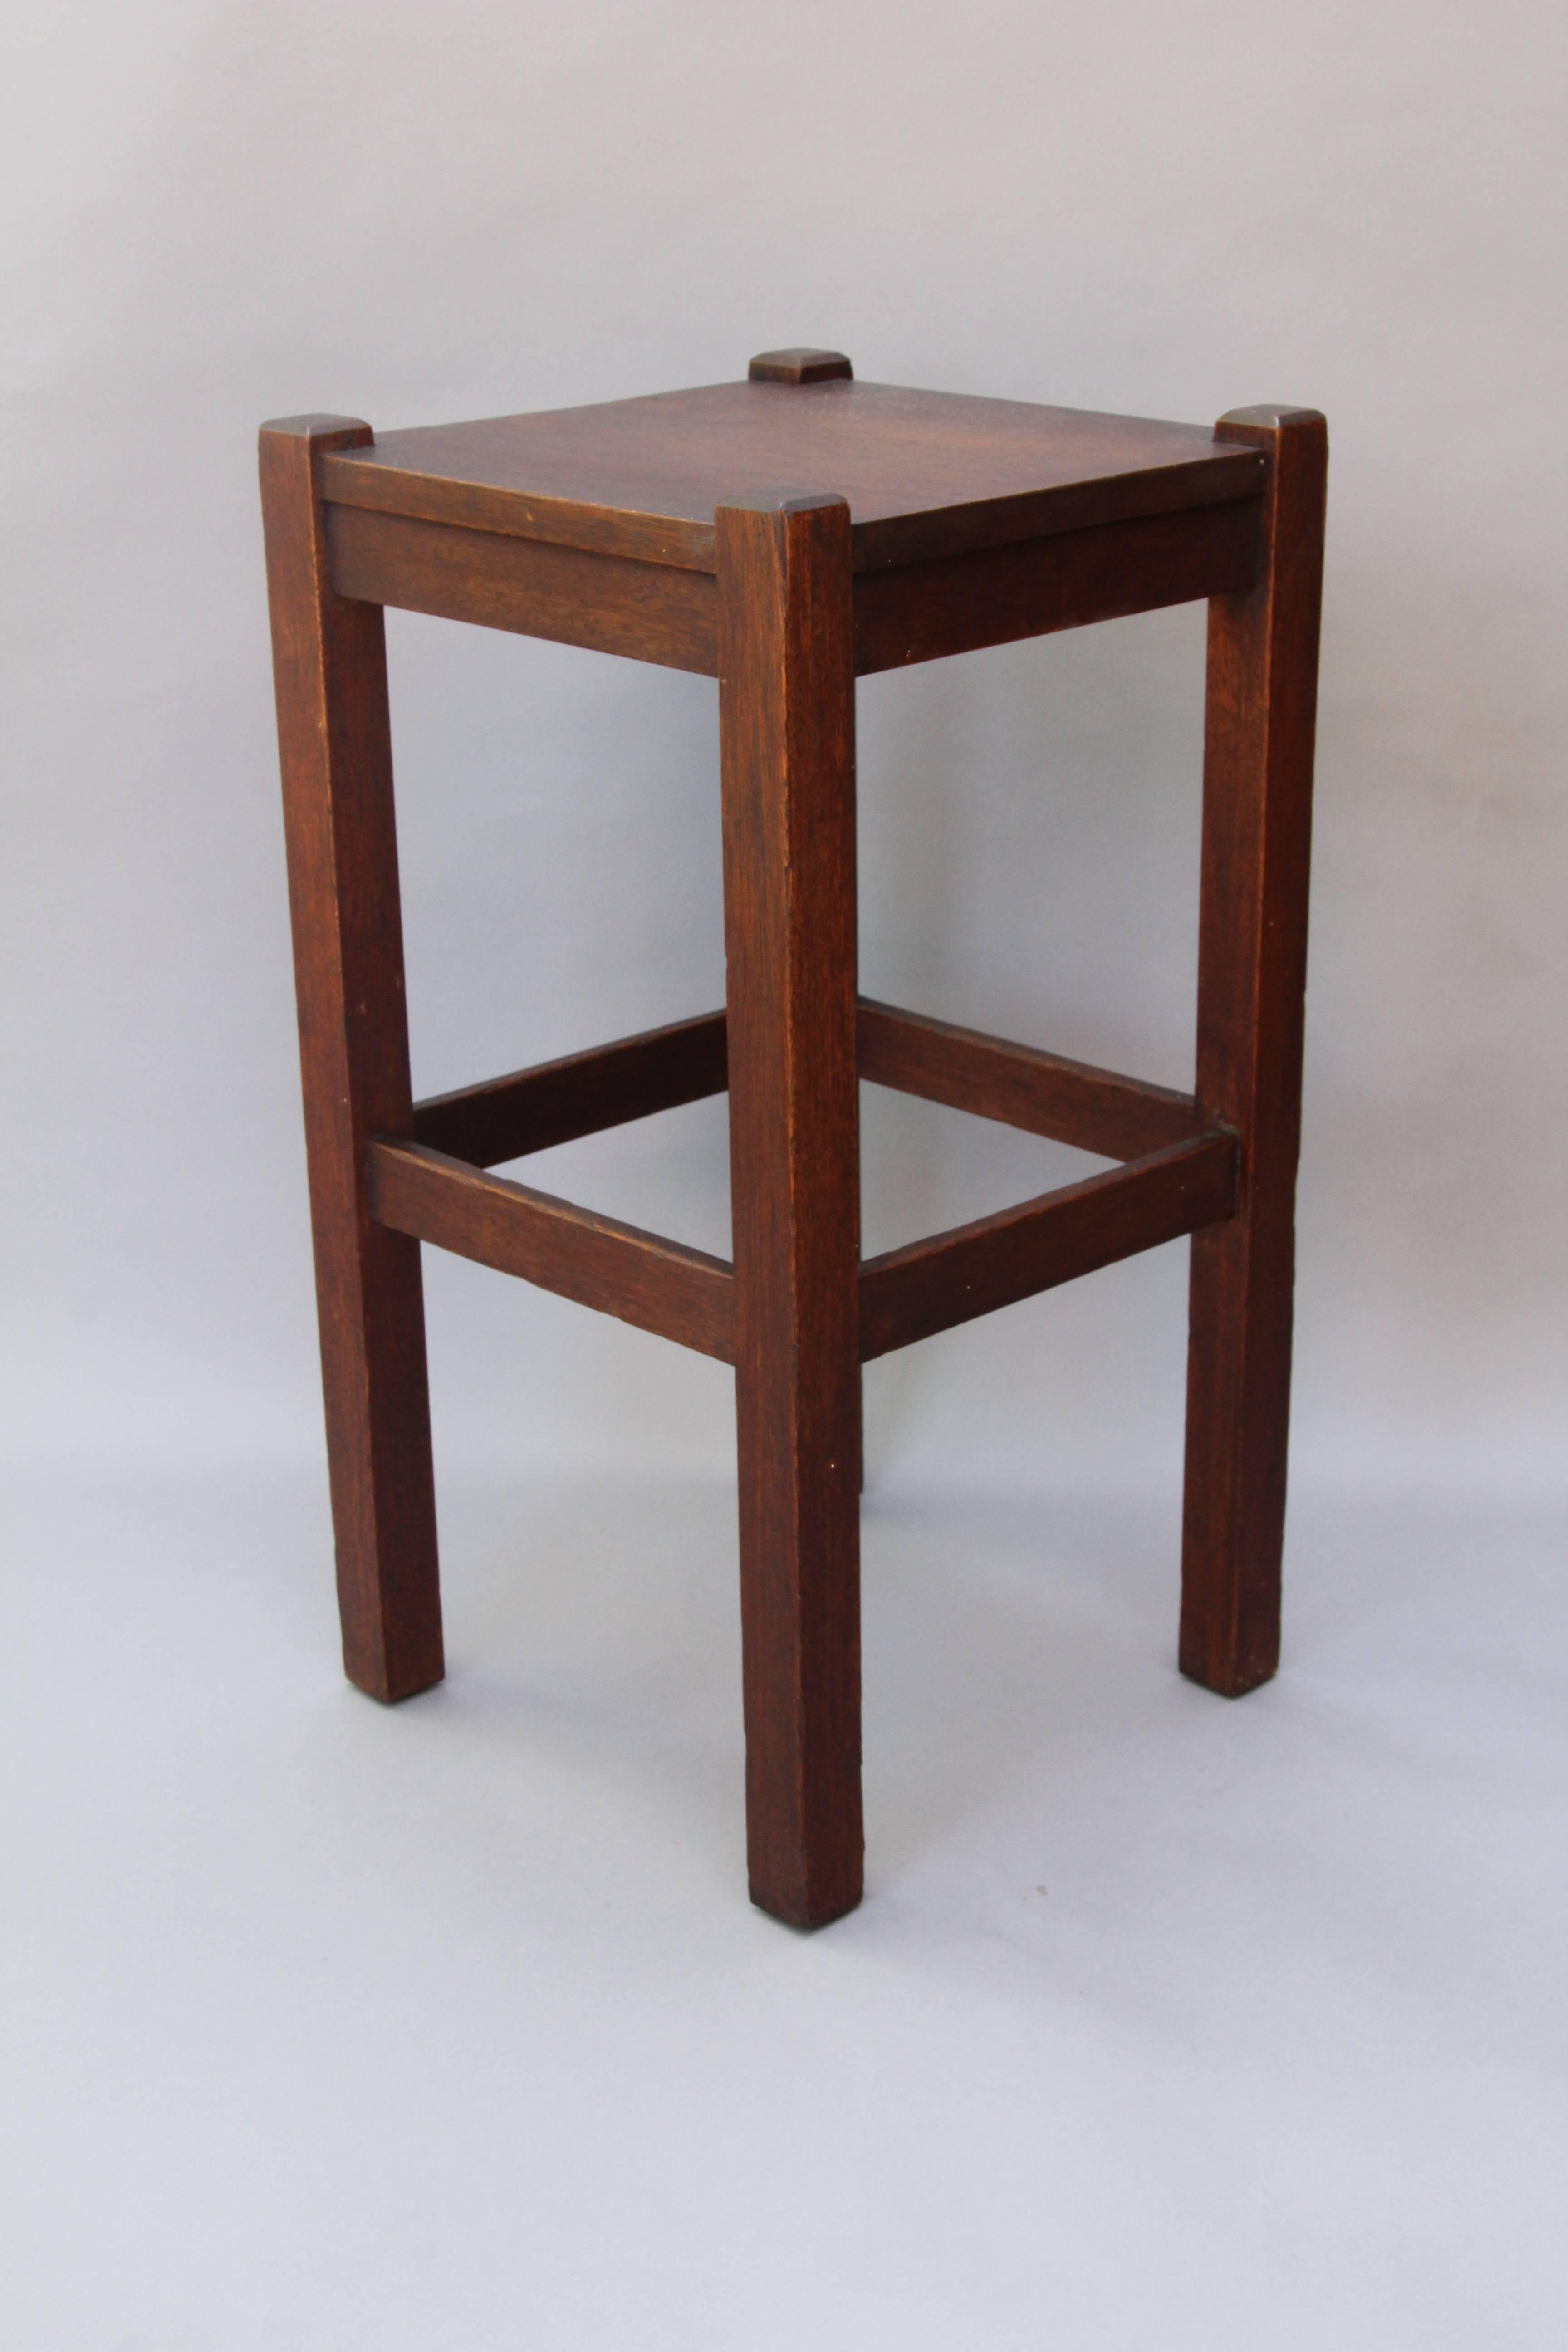 Arts & Crafts mission simple side table, circa 1910.